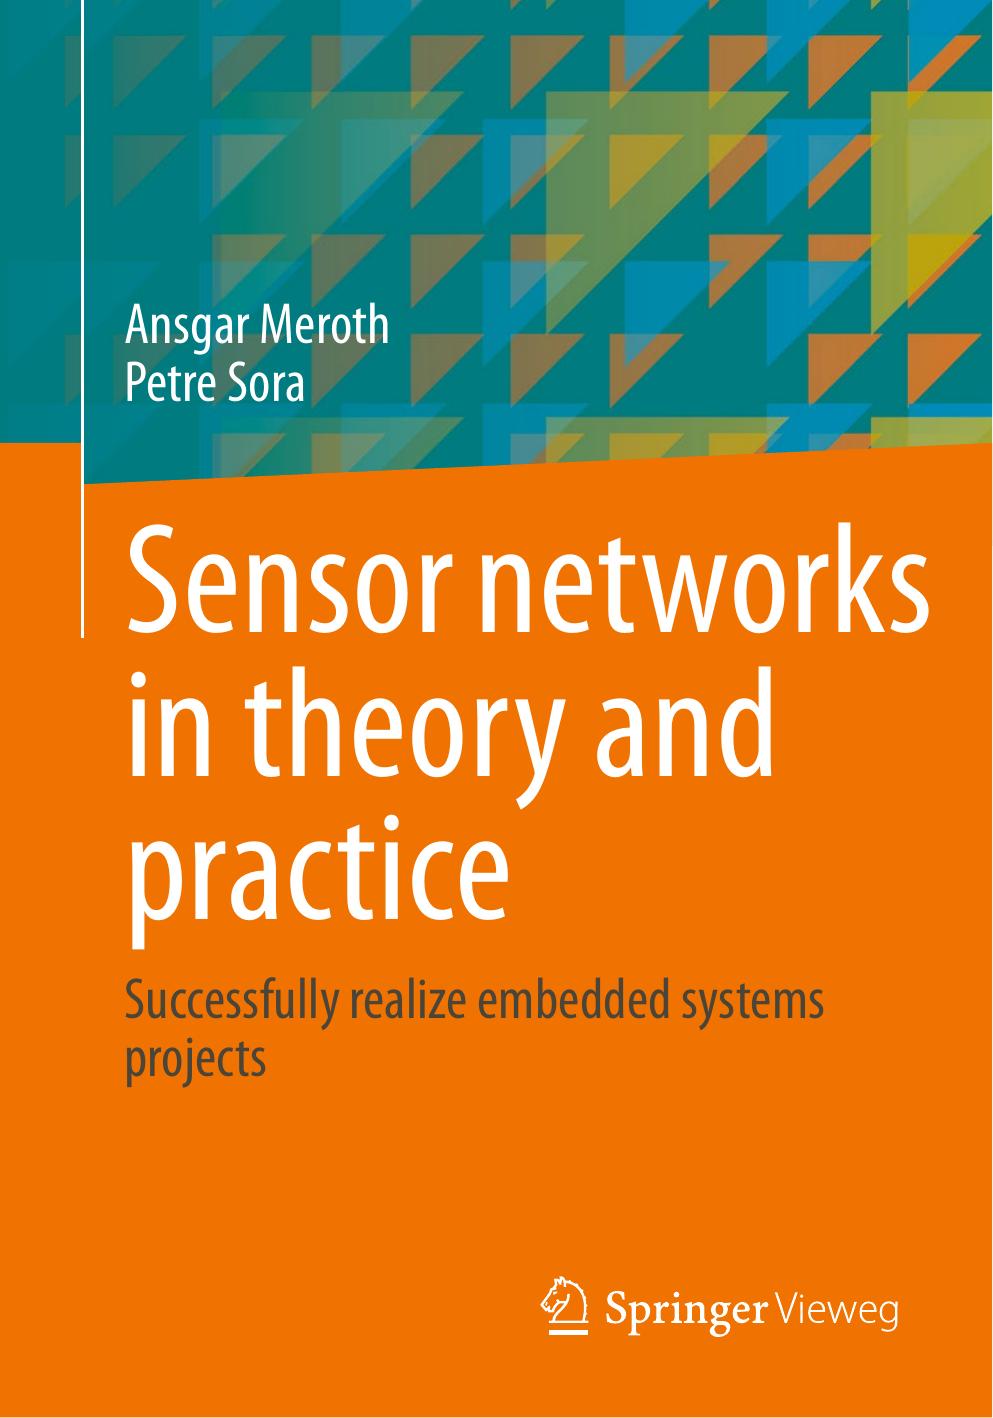 Sensor networks in theory and practice: Successfully realize embedded systems projects by Ansgar Meroth Petre Sora